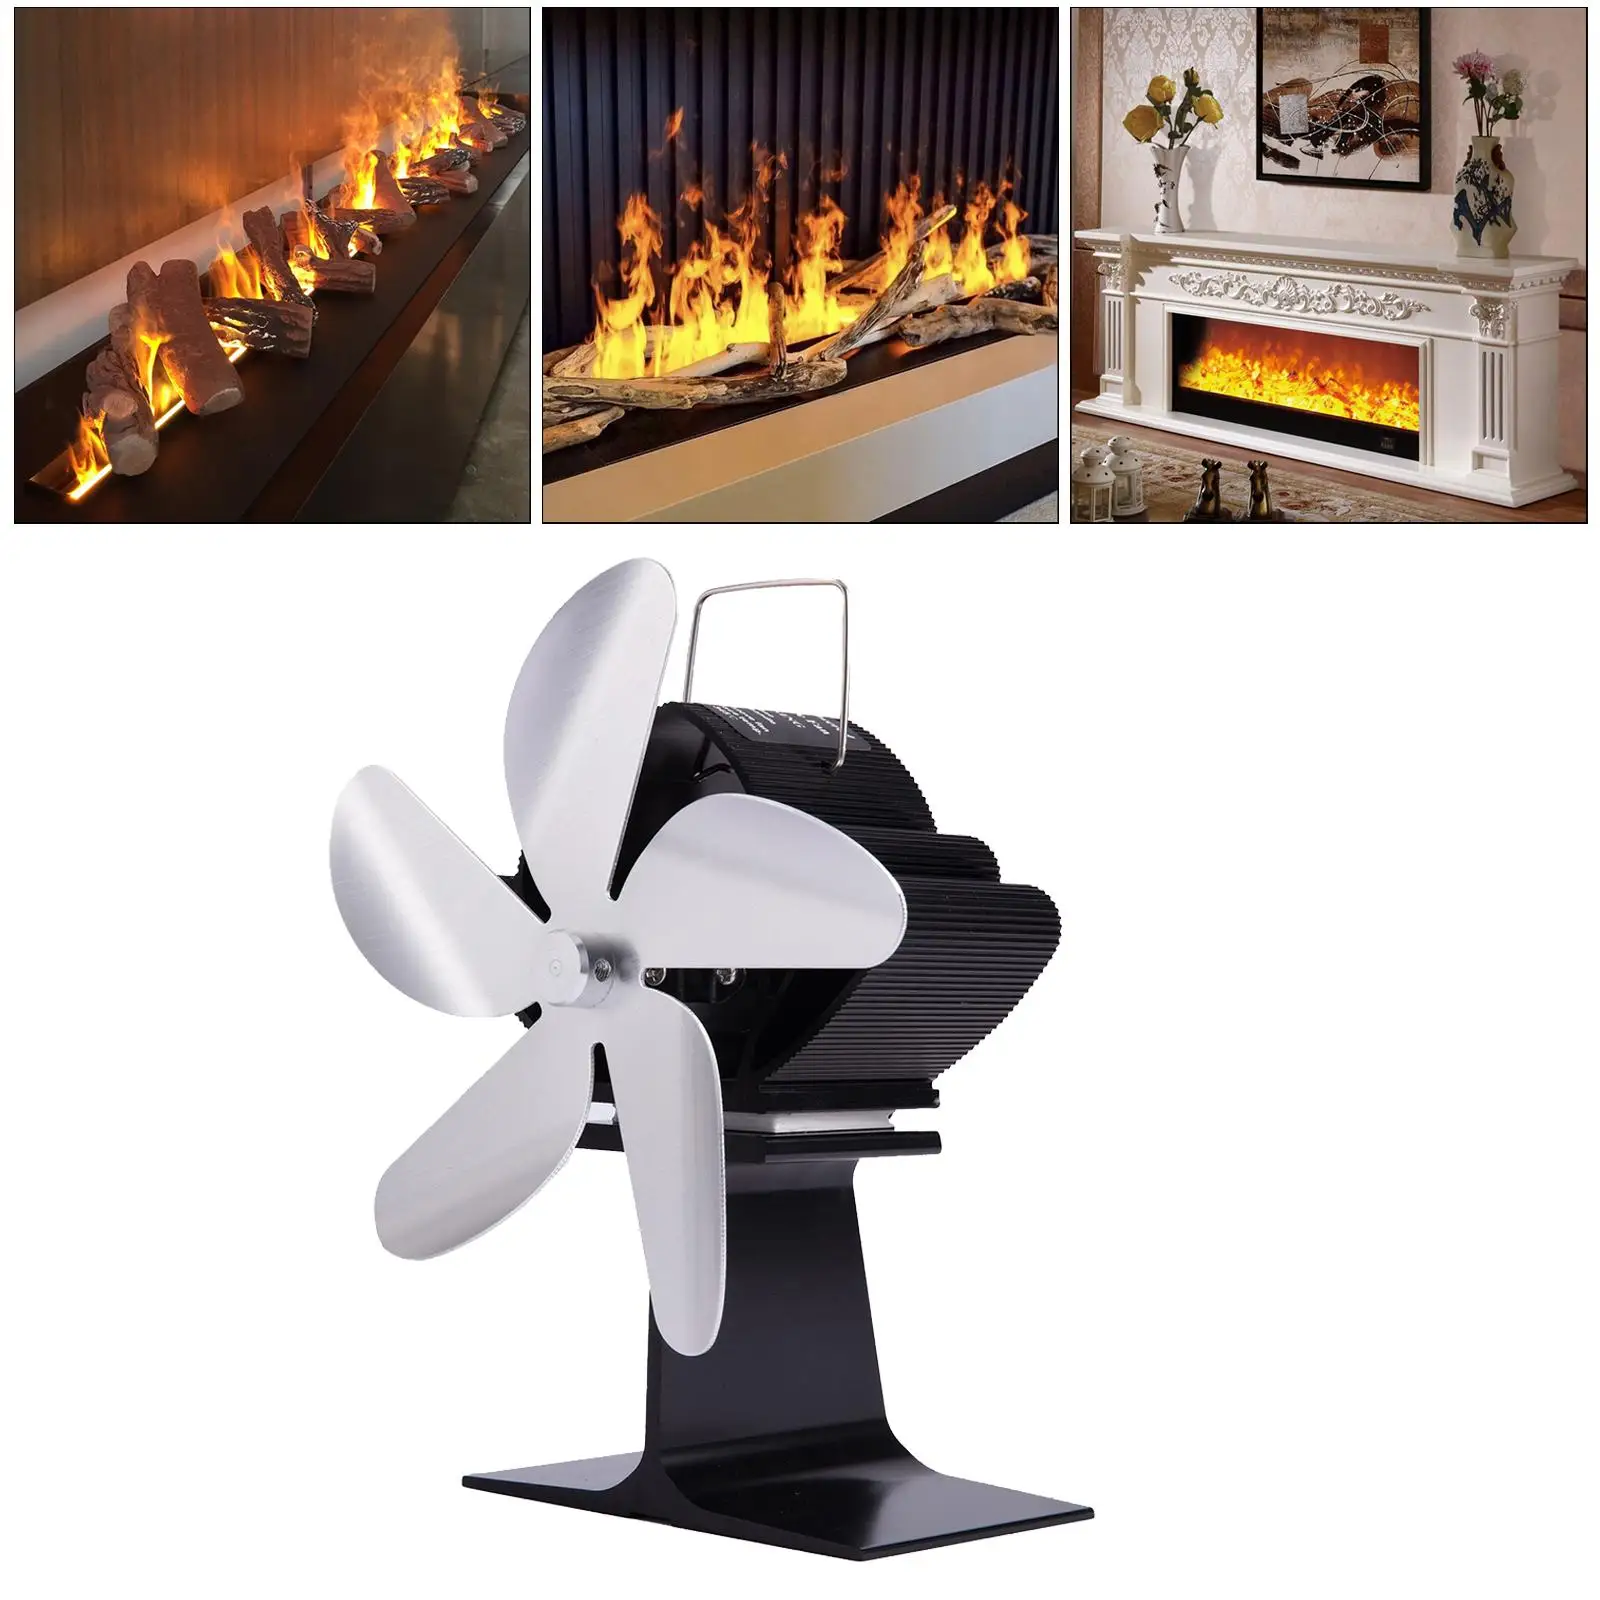 4 Blade  Powered Stove  Friendly  Distribute Air Circulation Fireplace Fan for Wood/Log Burner/Fireplace